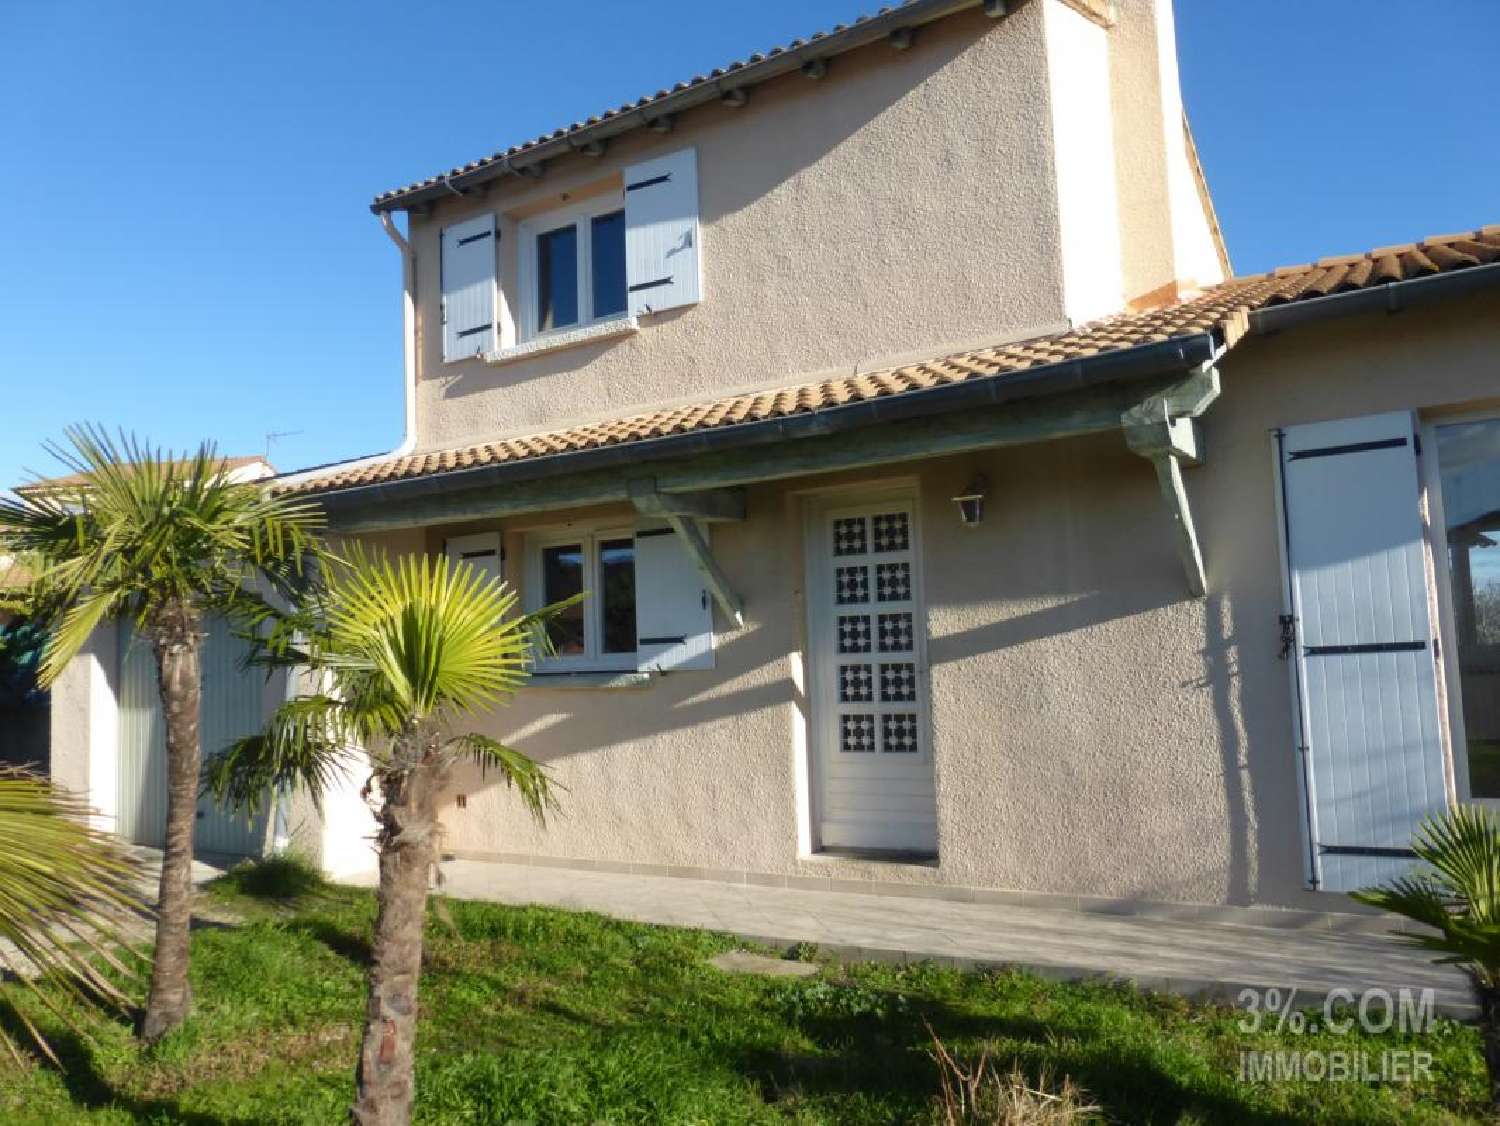  for sale house Rousson Gard 2